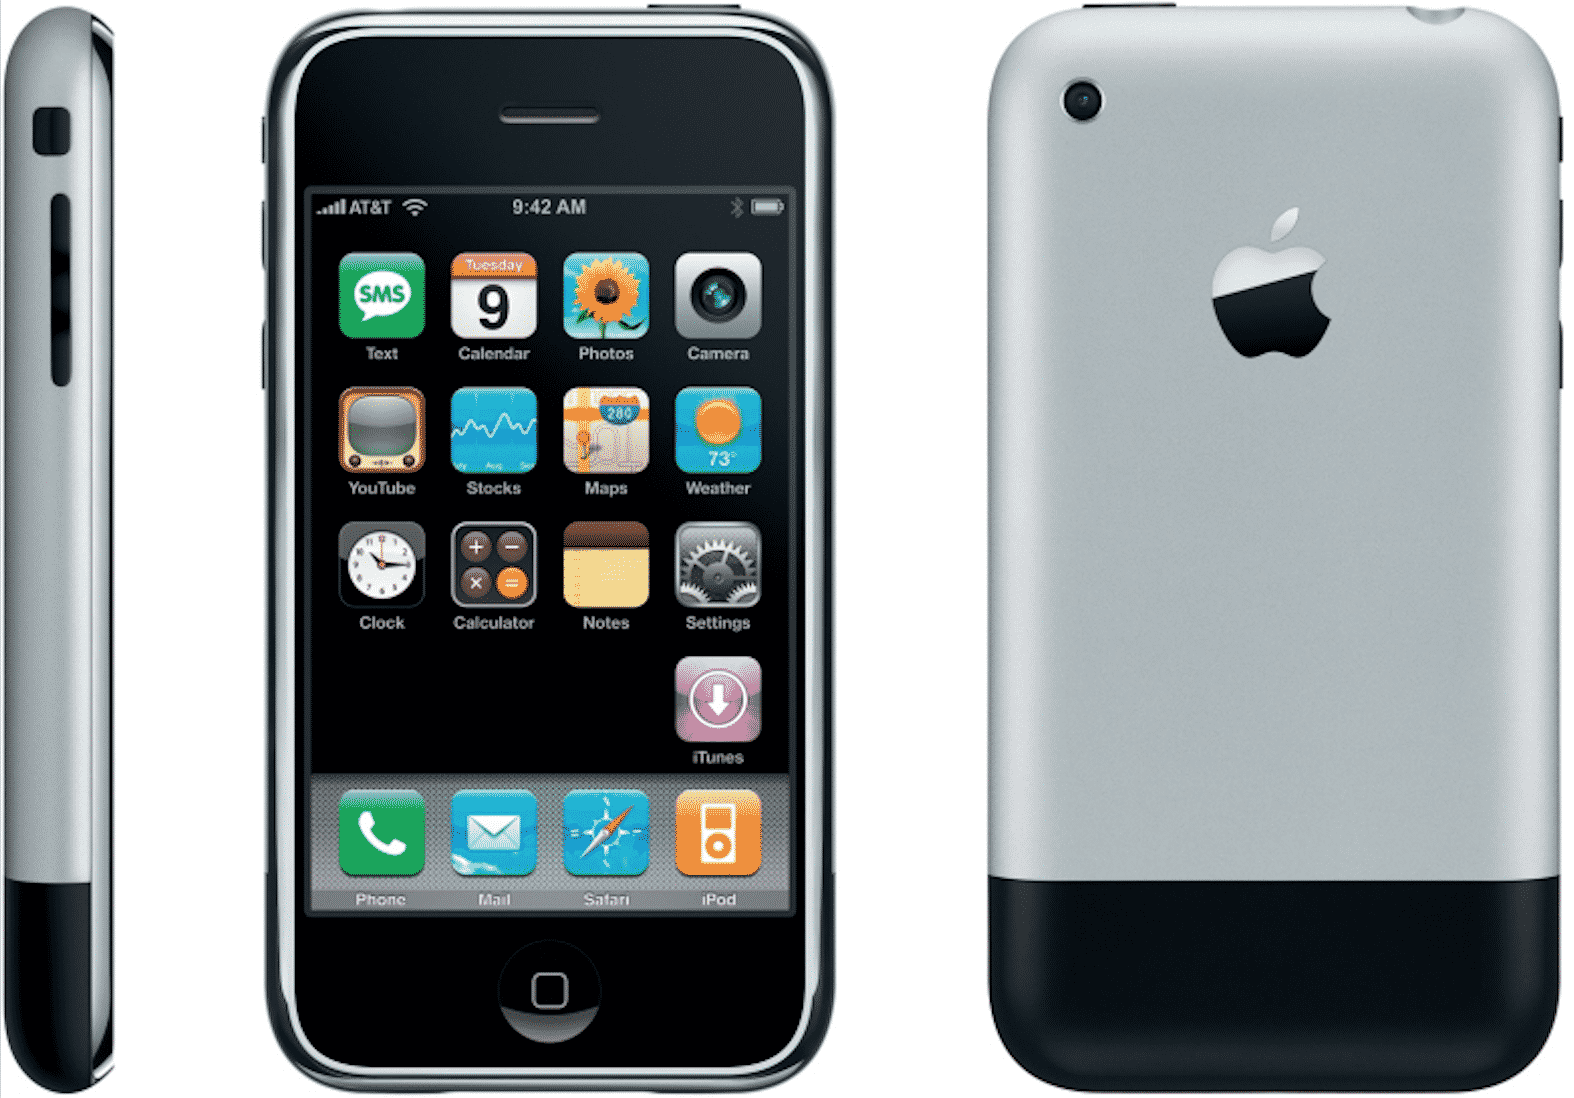 Today is the 13th Anniversary of the Original iPhone